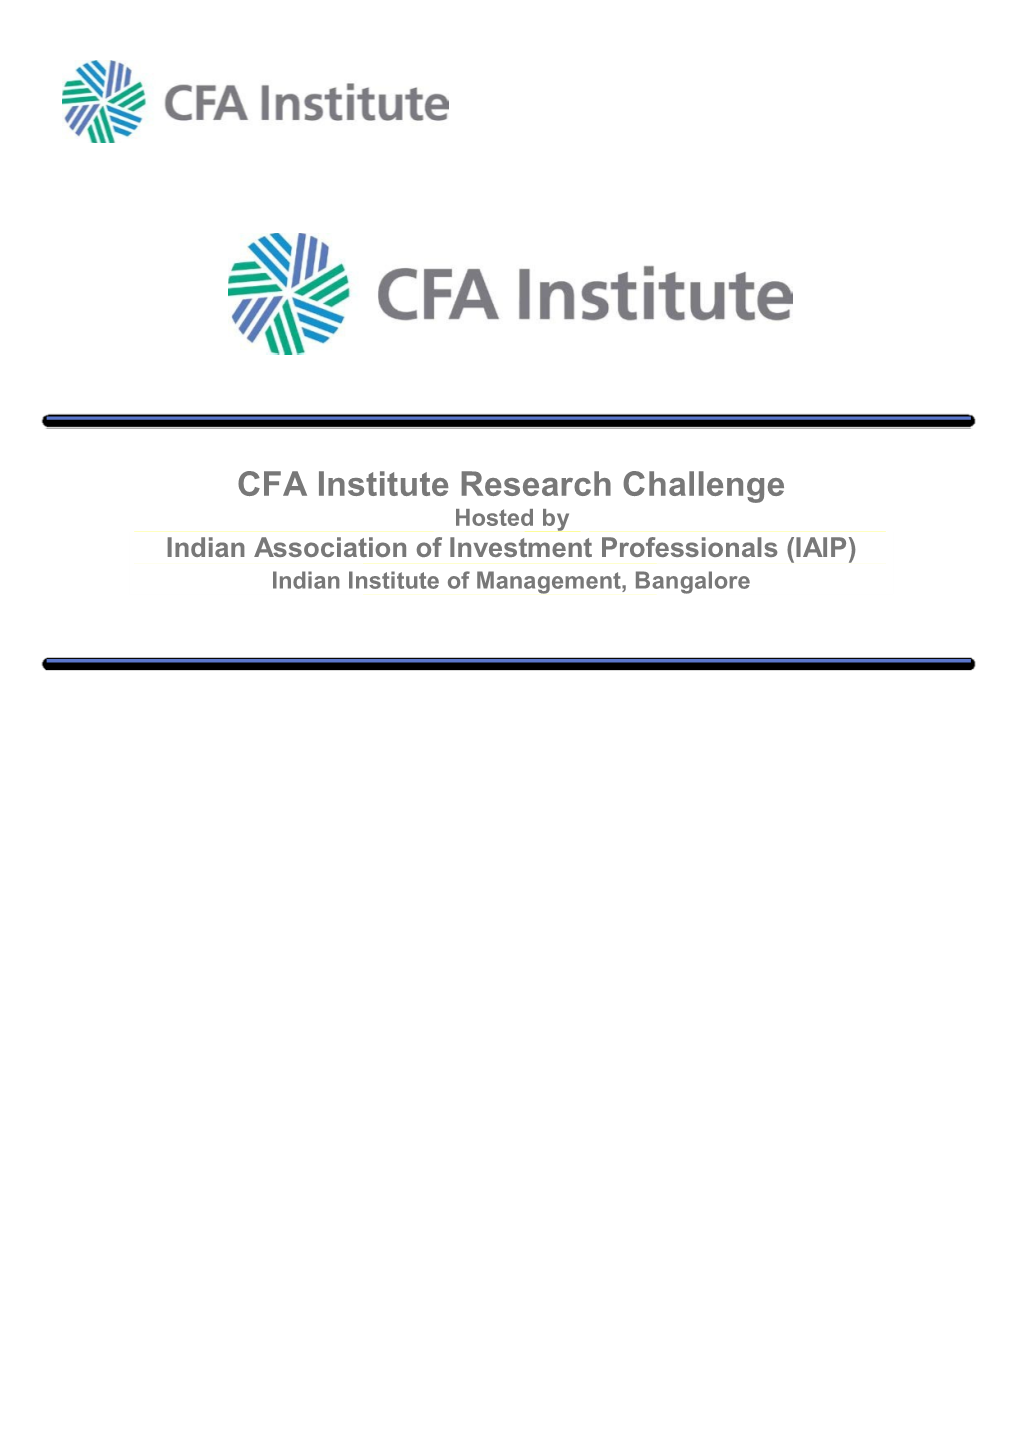 CFA Institute Research Challenge Hosted by Indian Association of Investment Professionals (IAIP) Indian Institute of Management, Bangalore